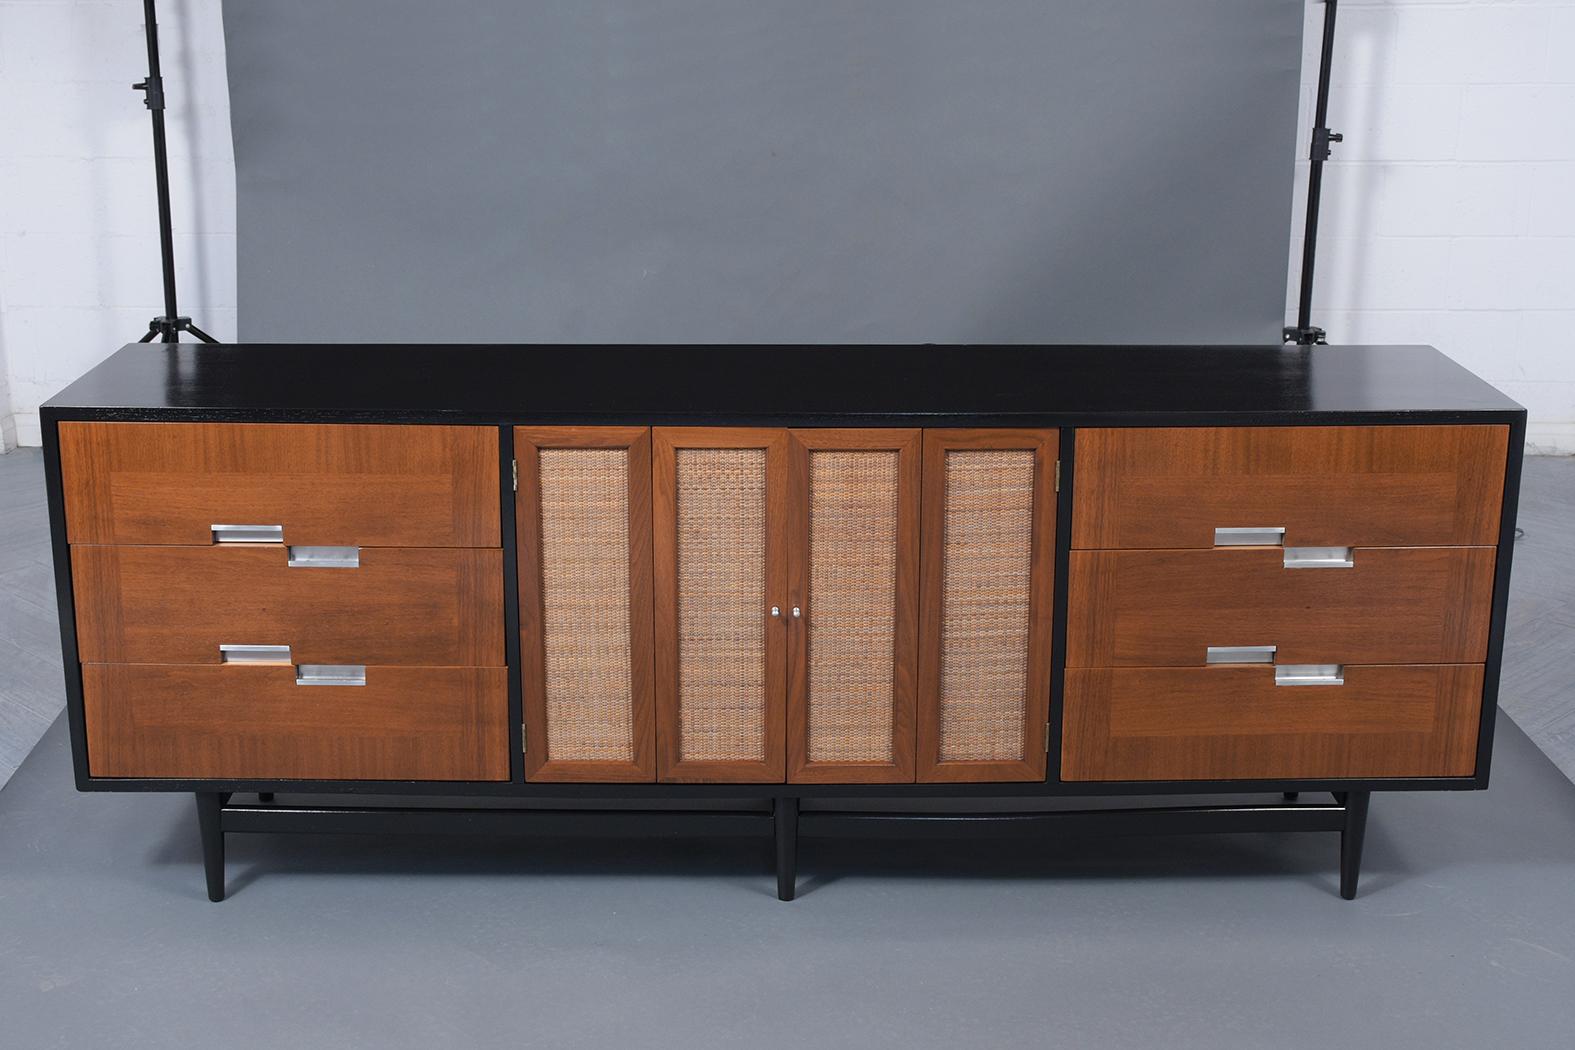 A beautiful 1960's modern credenza that has been professionally restored is made out of walnut wood and features a new ebonized & walnut color combination with a lacquer finish. This Chest of drawers comes with six drawers with asymmetric aluminum